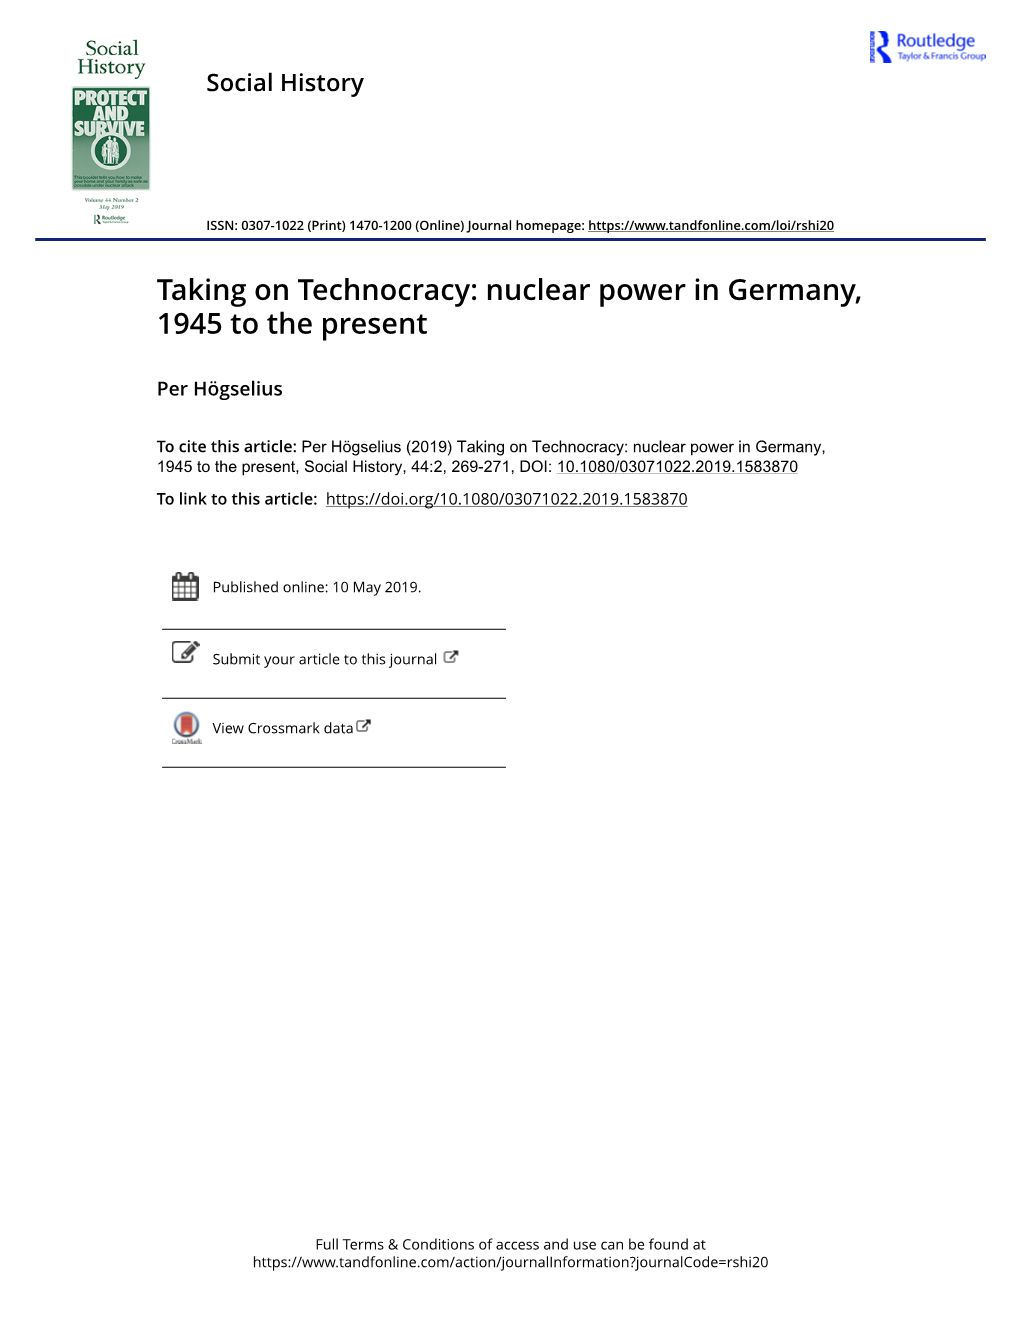 Nuclear Power in Germany, 1945 to the Present